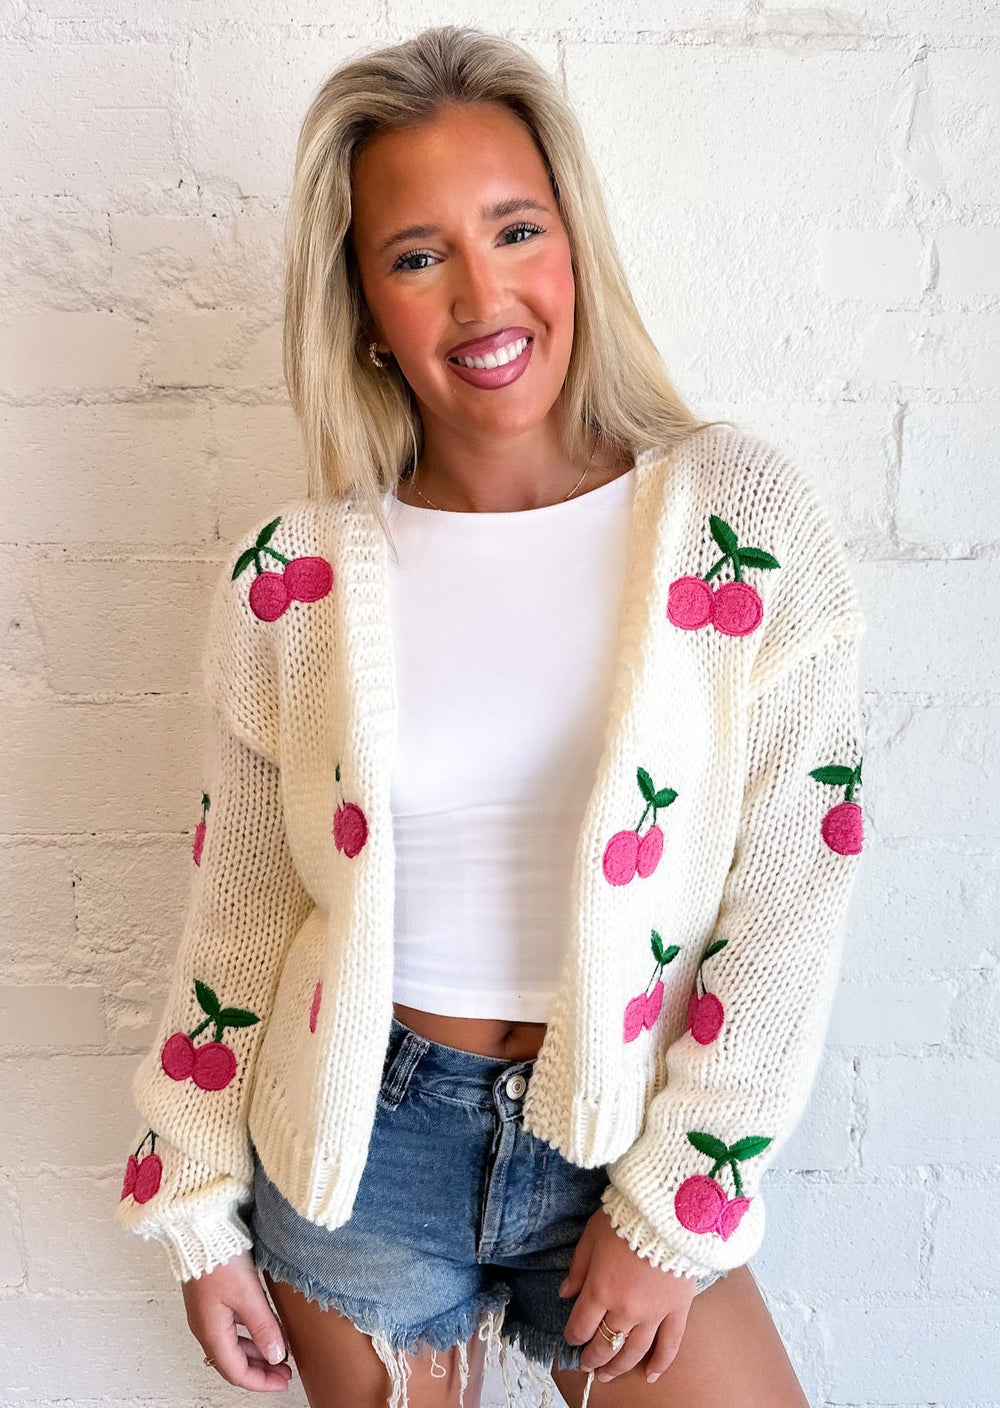 Cherry Picked Cardigan, Tops, Adeline, Adeline, dallas boutique, dallas texas, texas boutique, women's boutique dallas, adeline boutique, dallas boutique, trendy boutique, affordable boutique